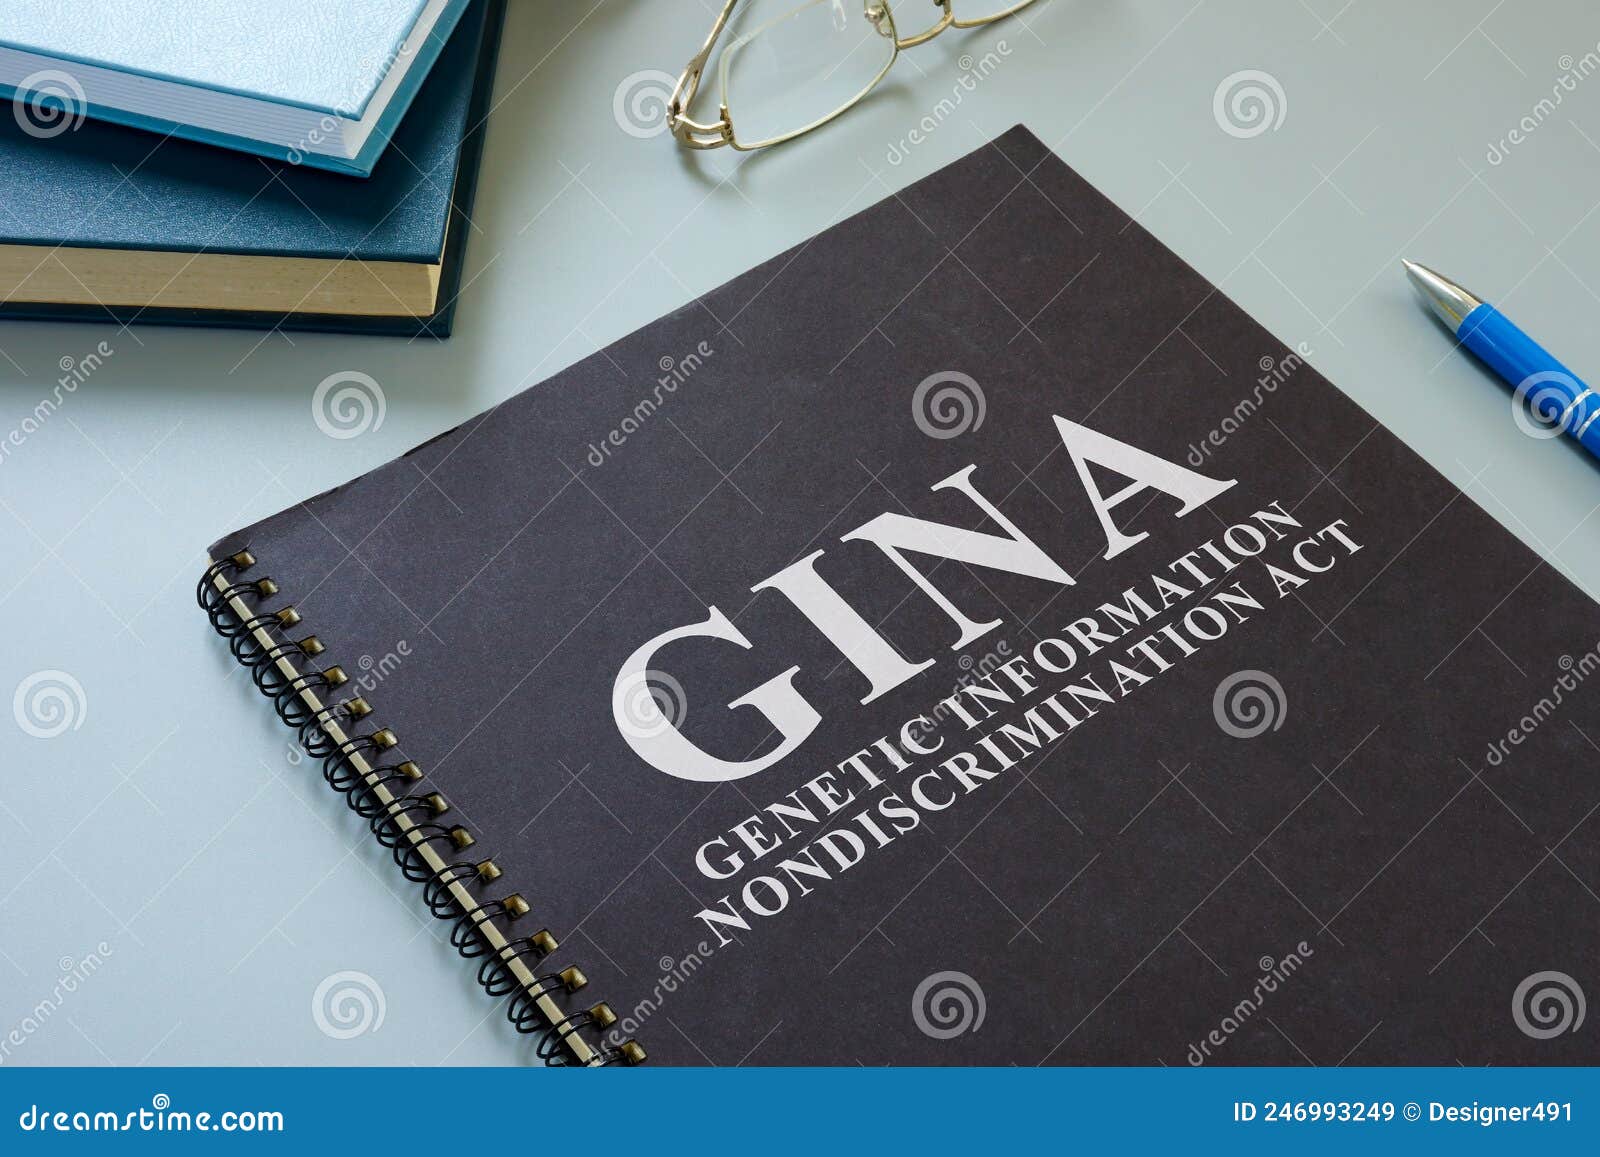 gina genetic information nondiscrimination act on the desk.